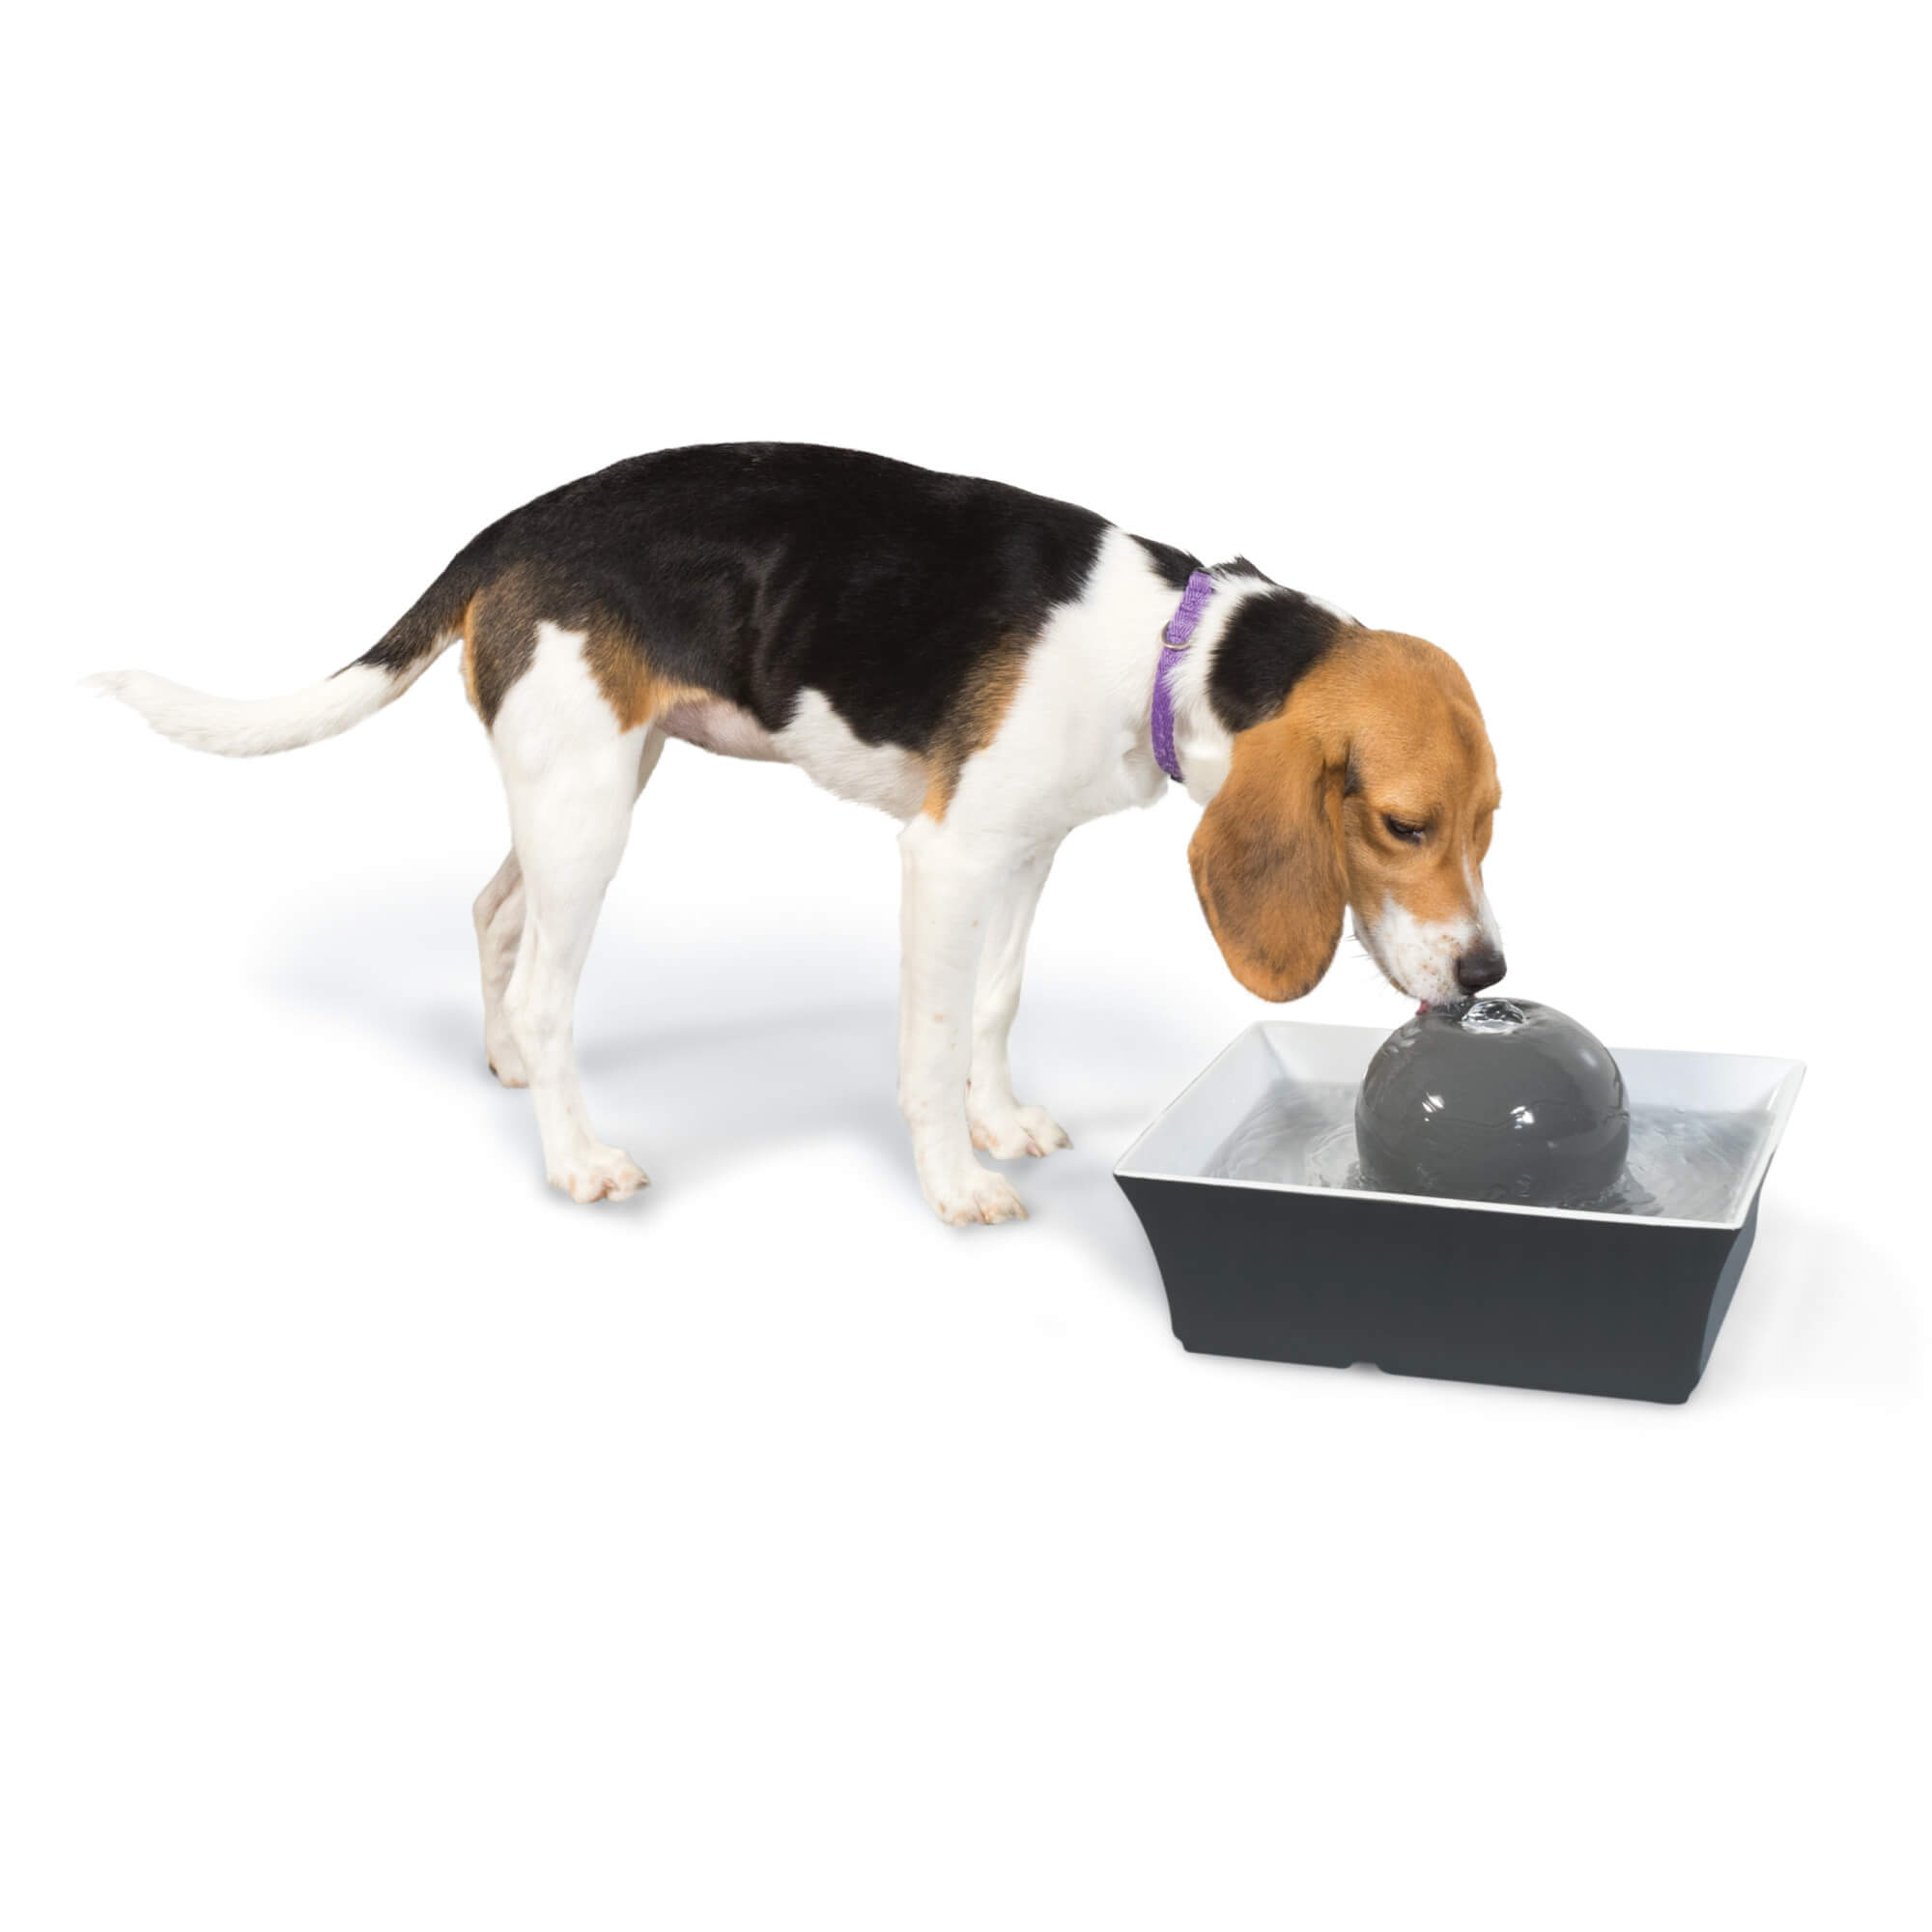 Dog drinking from drinkwell seascape pet fountain - automatic waterer